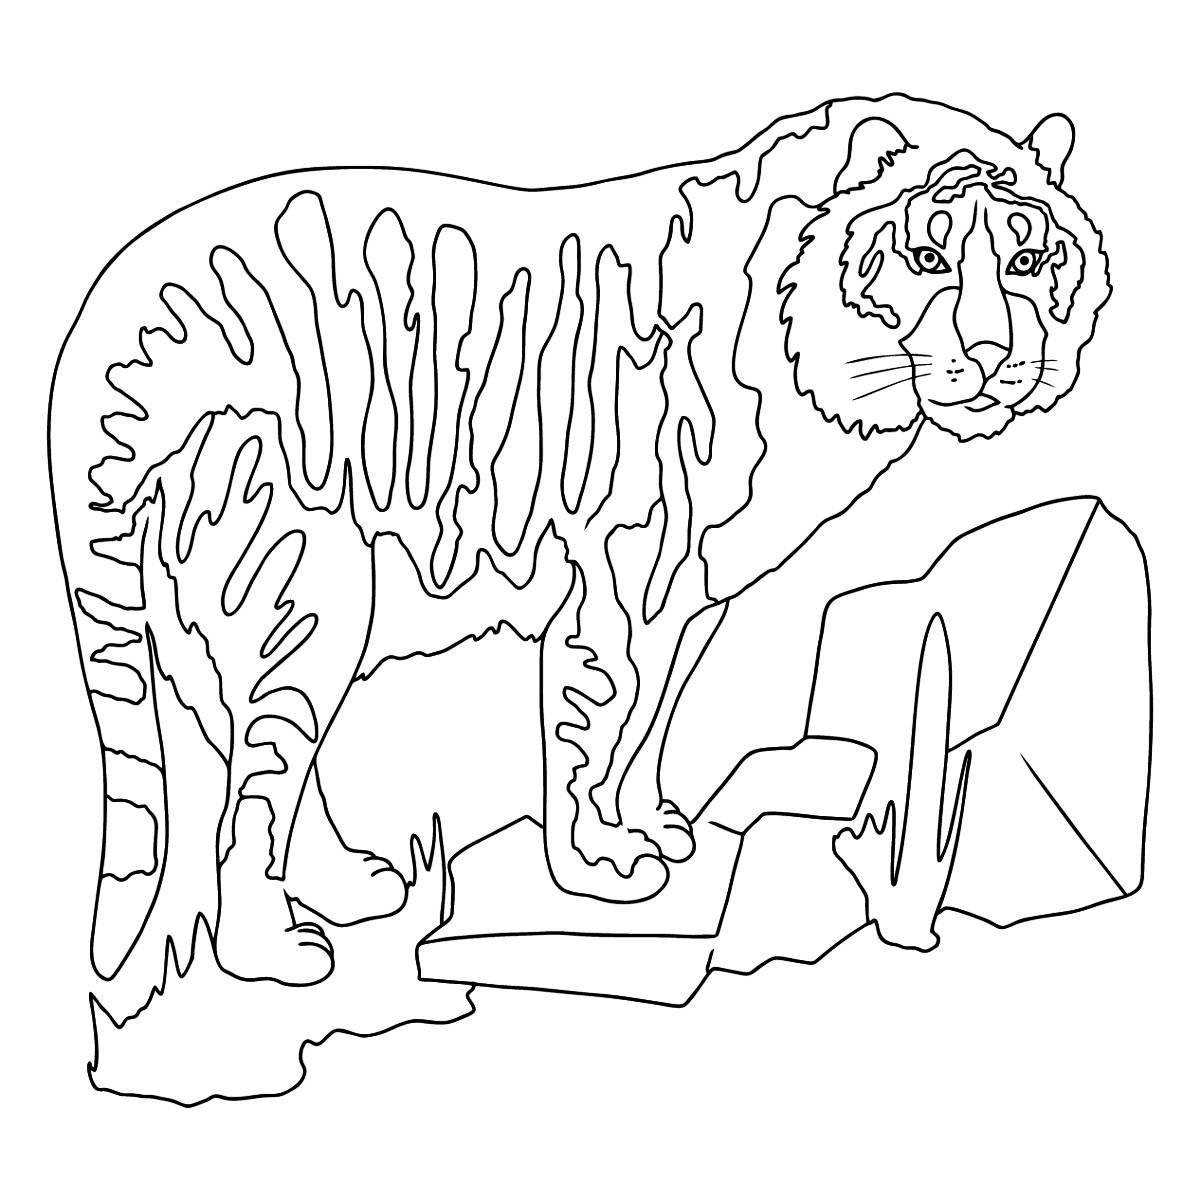 Vibrant tiger coloring page for 3-4 year olds